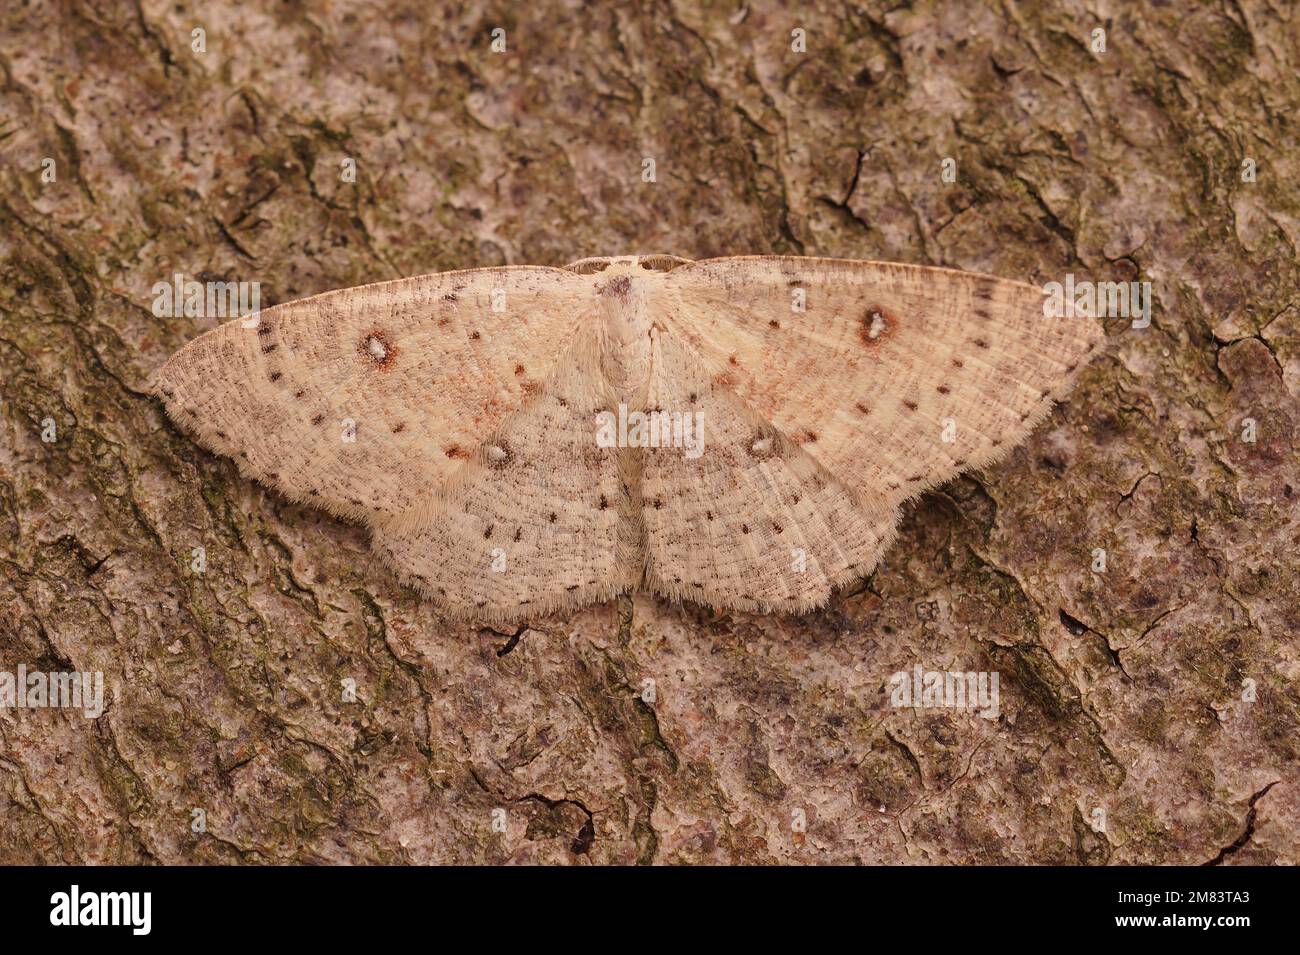 Closeup on a Birch Mocha geometer moth, Cyclophora albipunctata with spread wings on a piece of wood in the garden Stock Photo